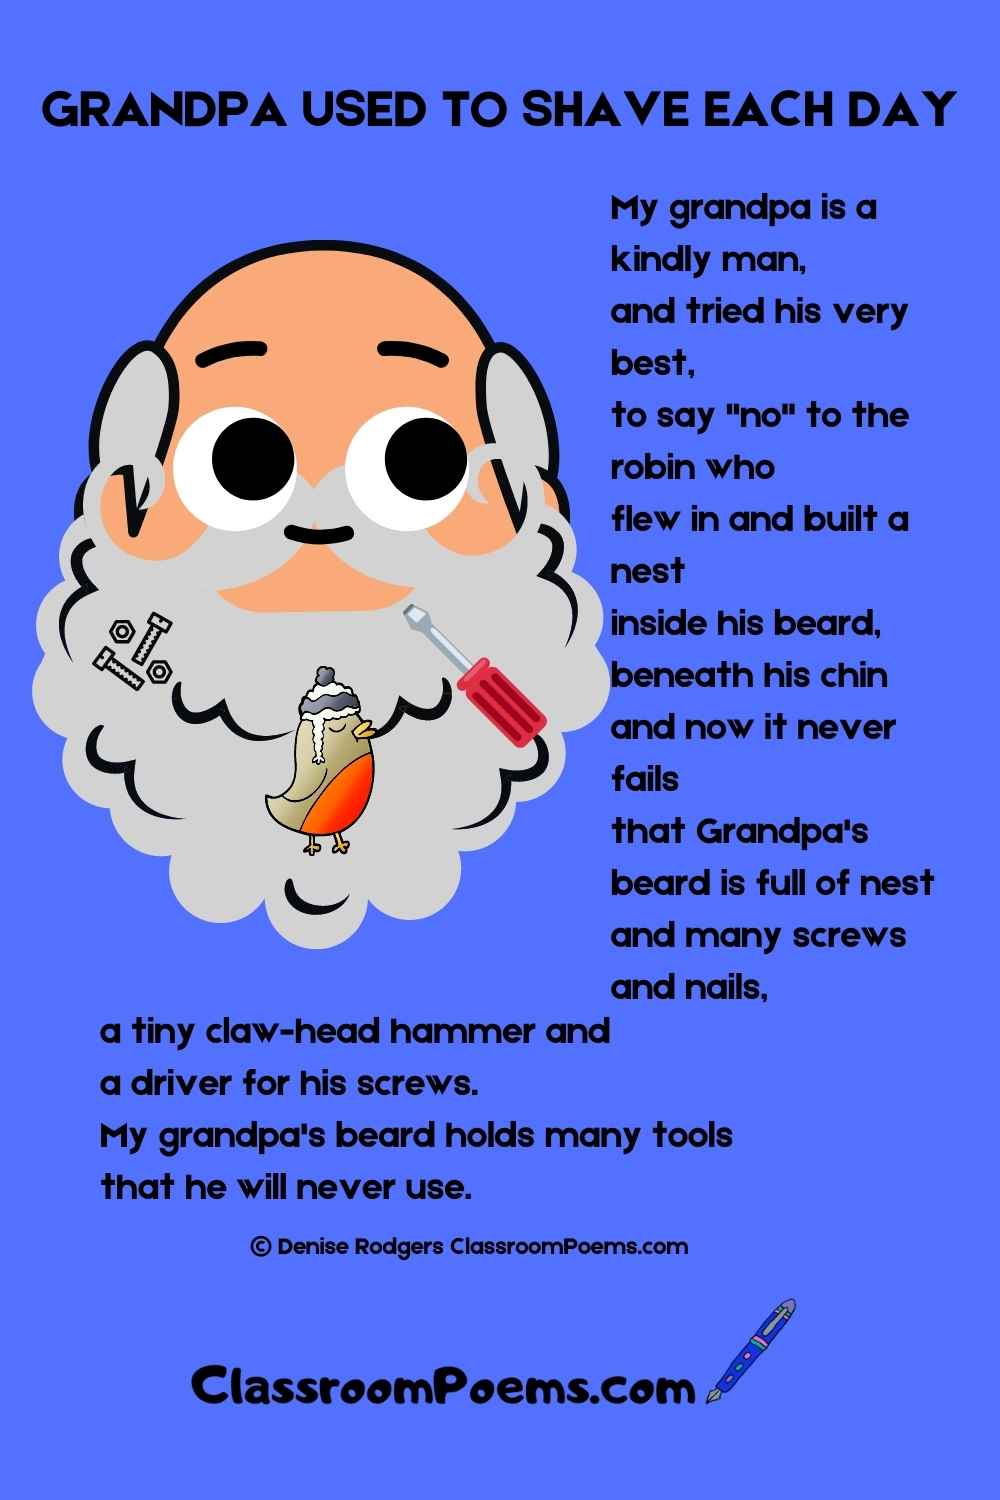 GRANDPA USED TO SHAVE EACH DAY poem. Family poems by Denise Rodgers on ClassroomPoems.com.